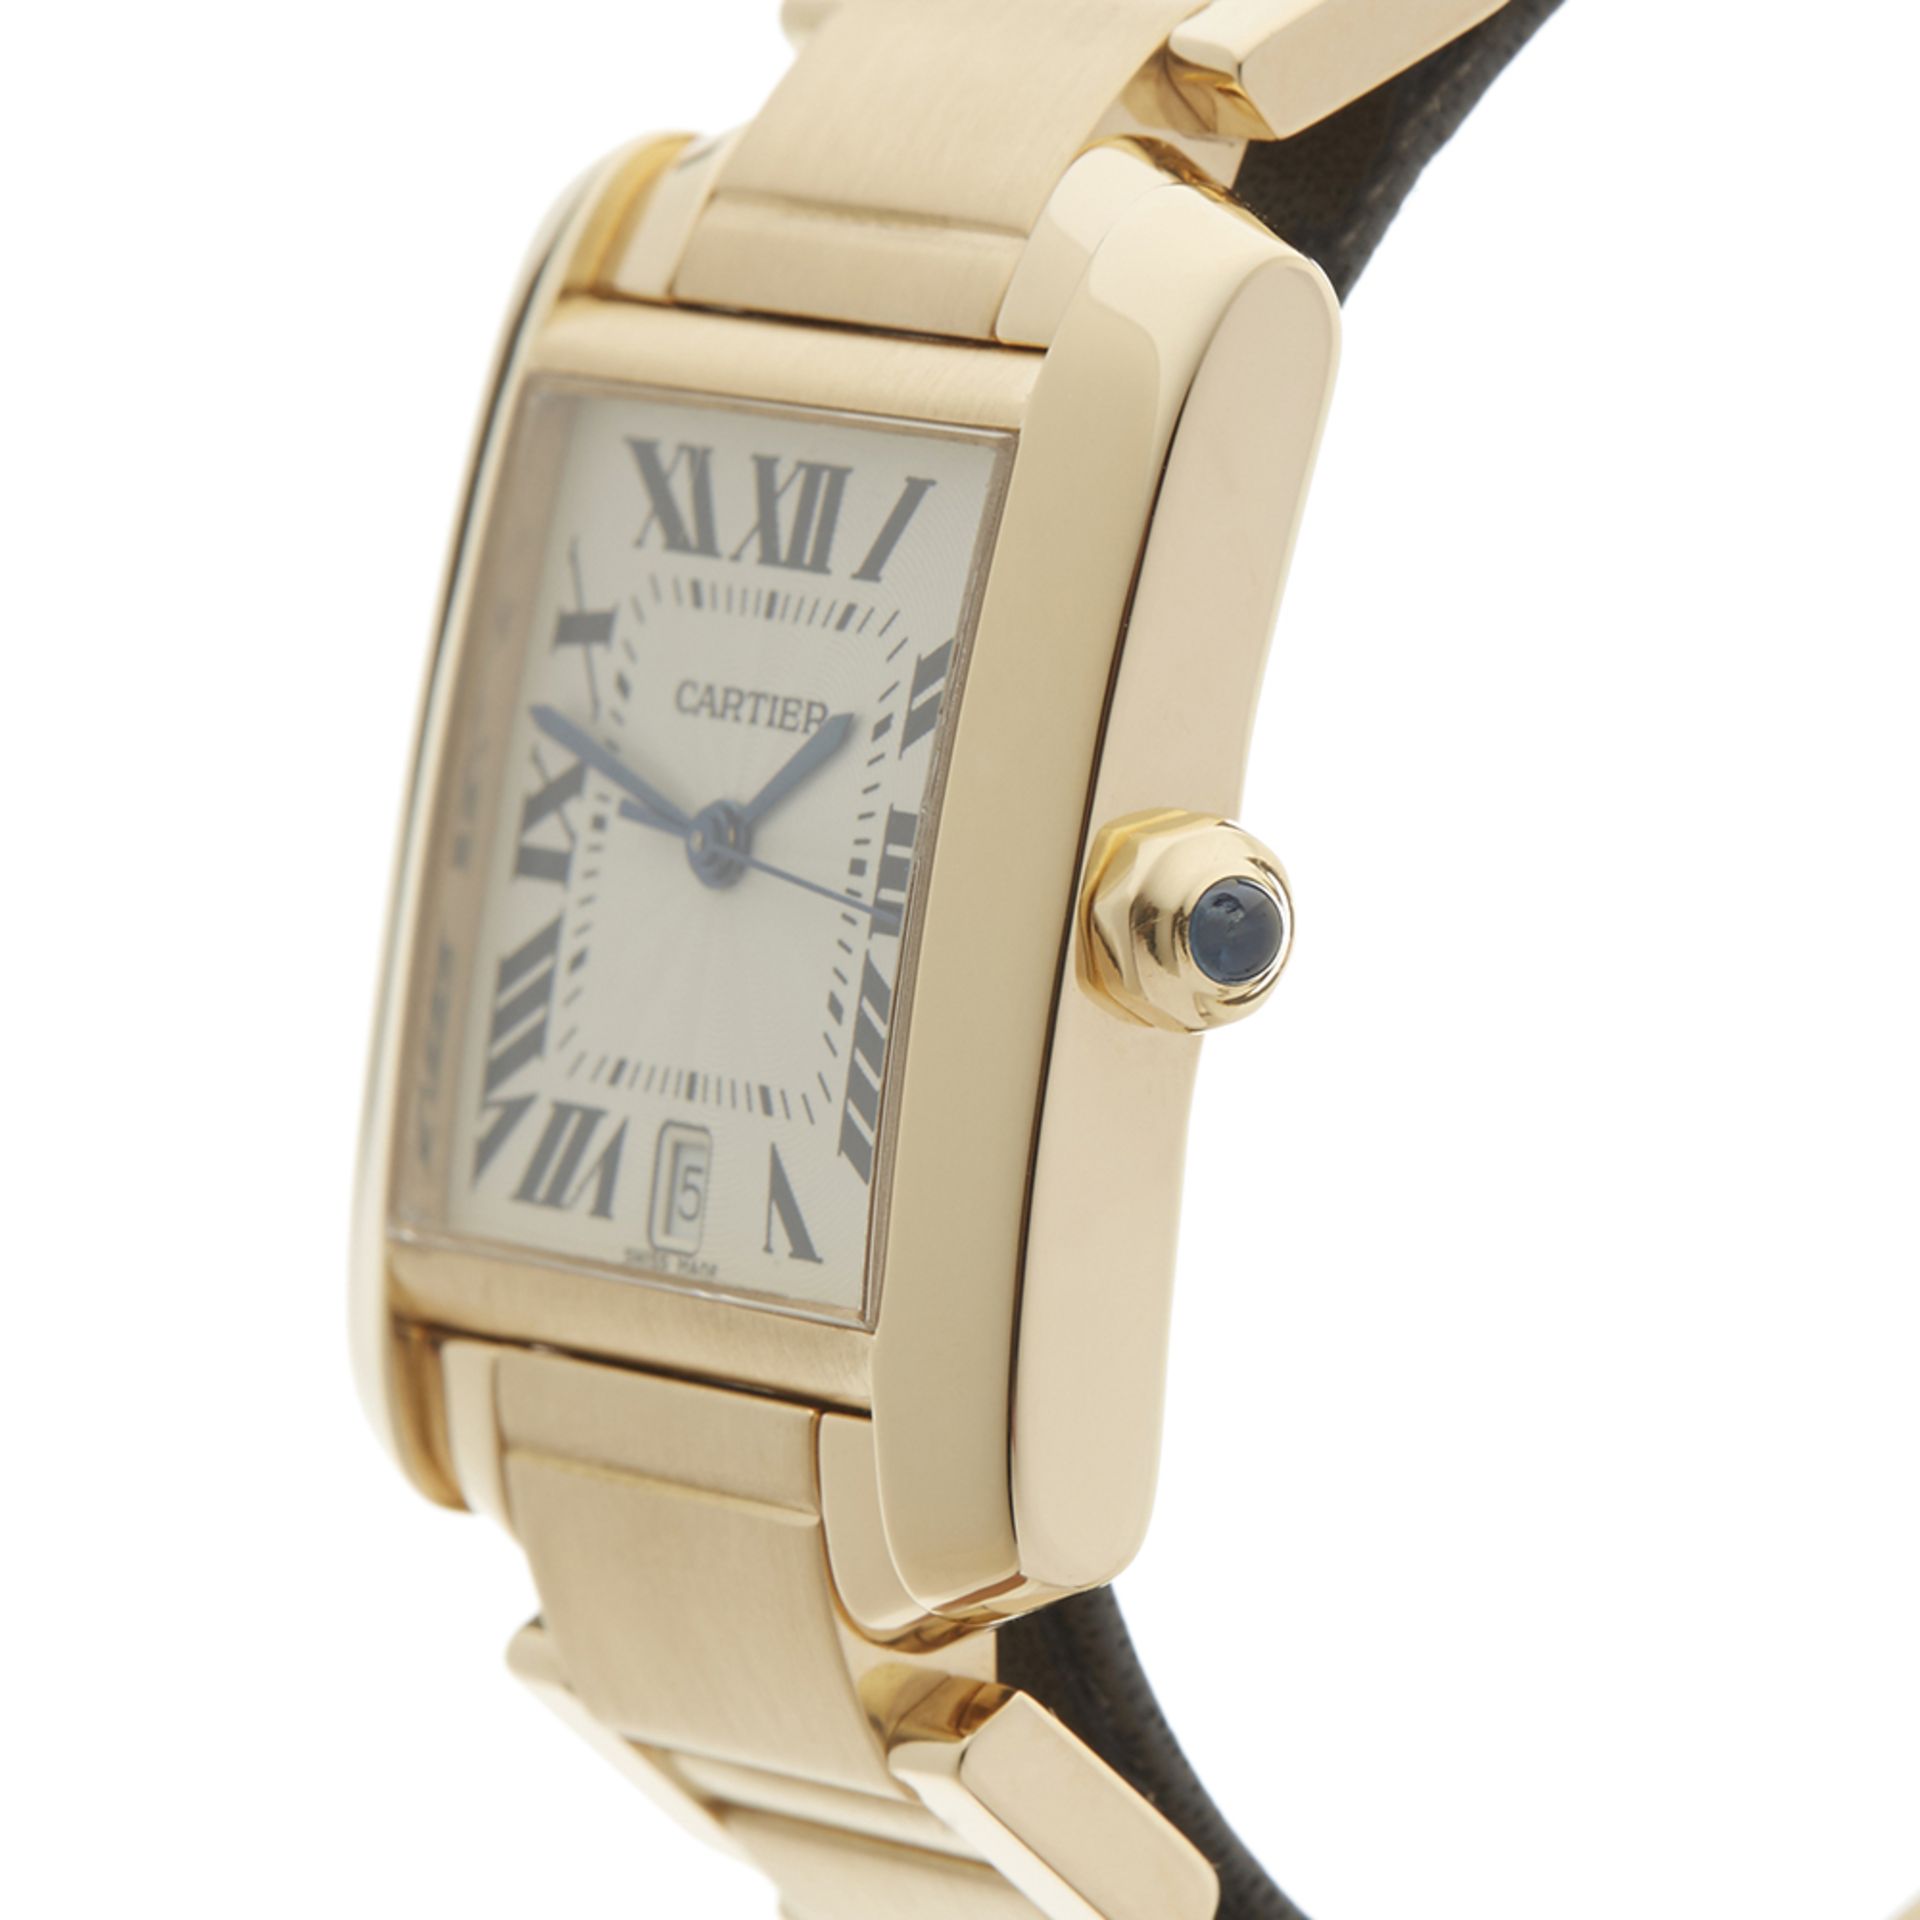 Cartier Tank Francaise 28mm 18k Yellow Gold - 1840 or W50001R2 - Image 4 of 8